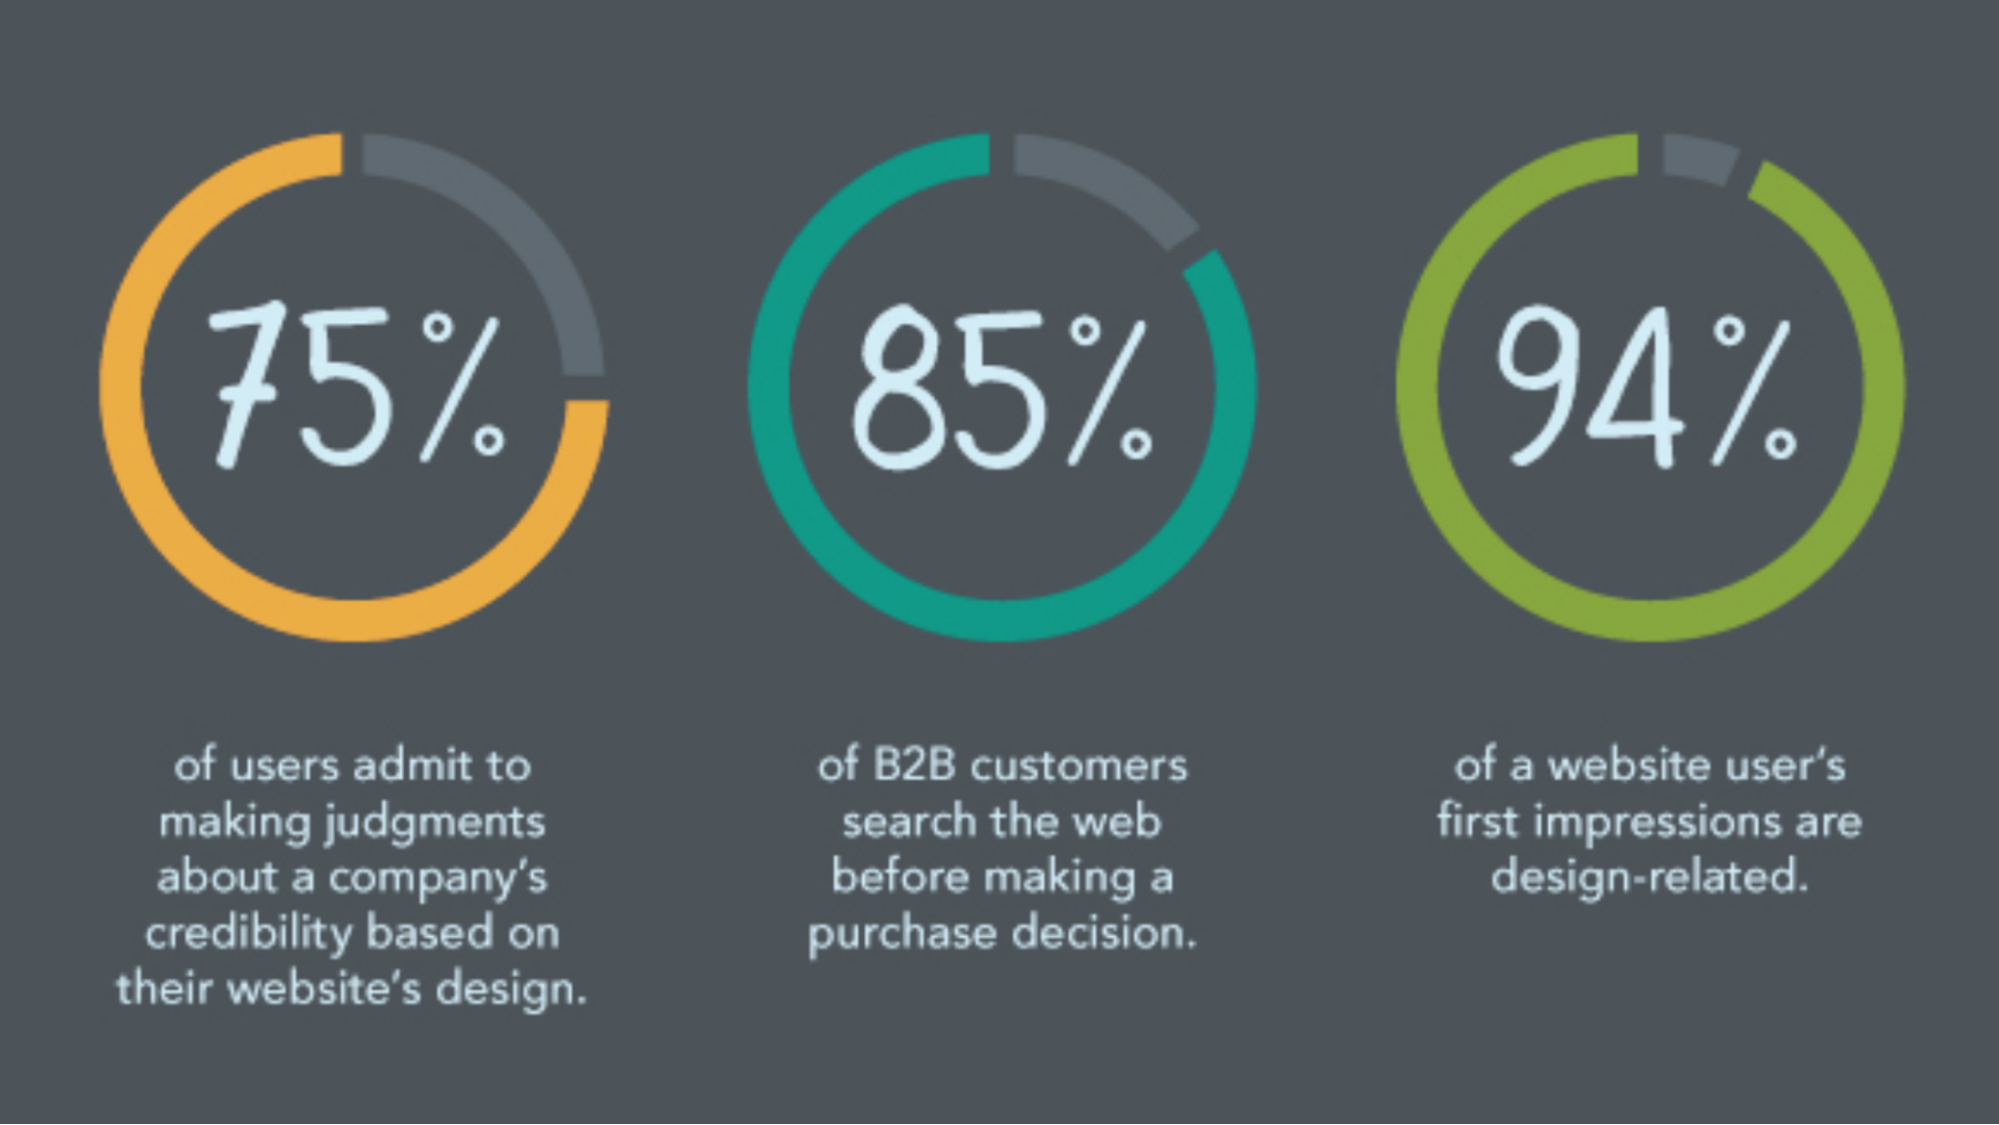 60% of customers visit a website before making a purchase